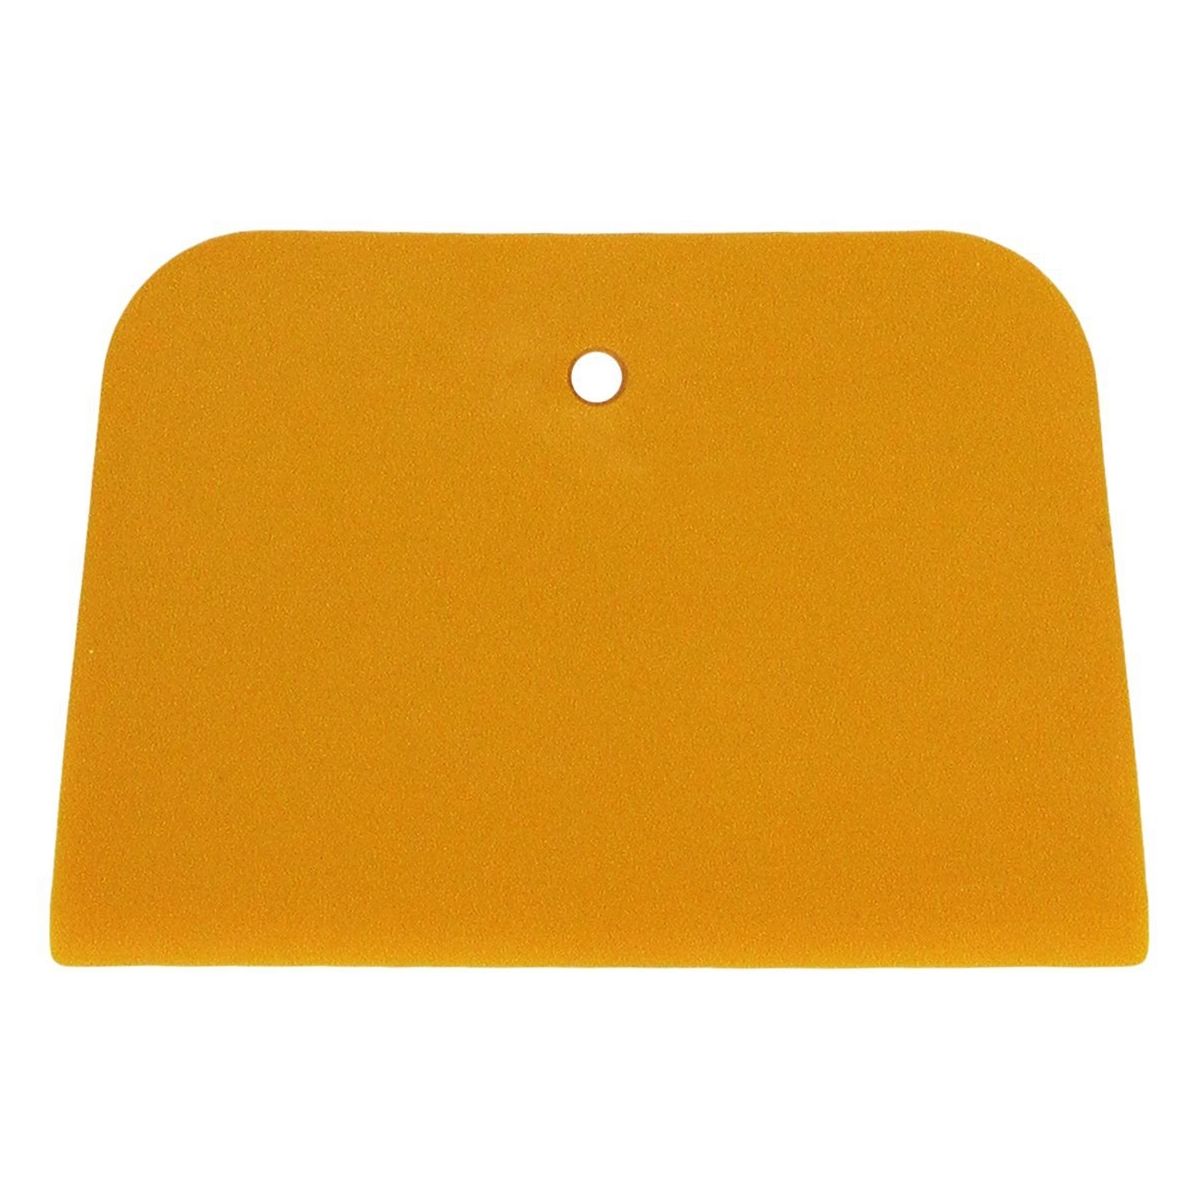 Yellow Spreaders 3 Inch x 4 Inch 144/Case